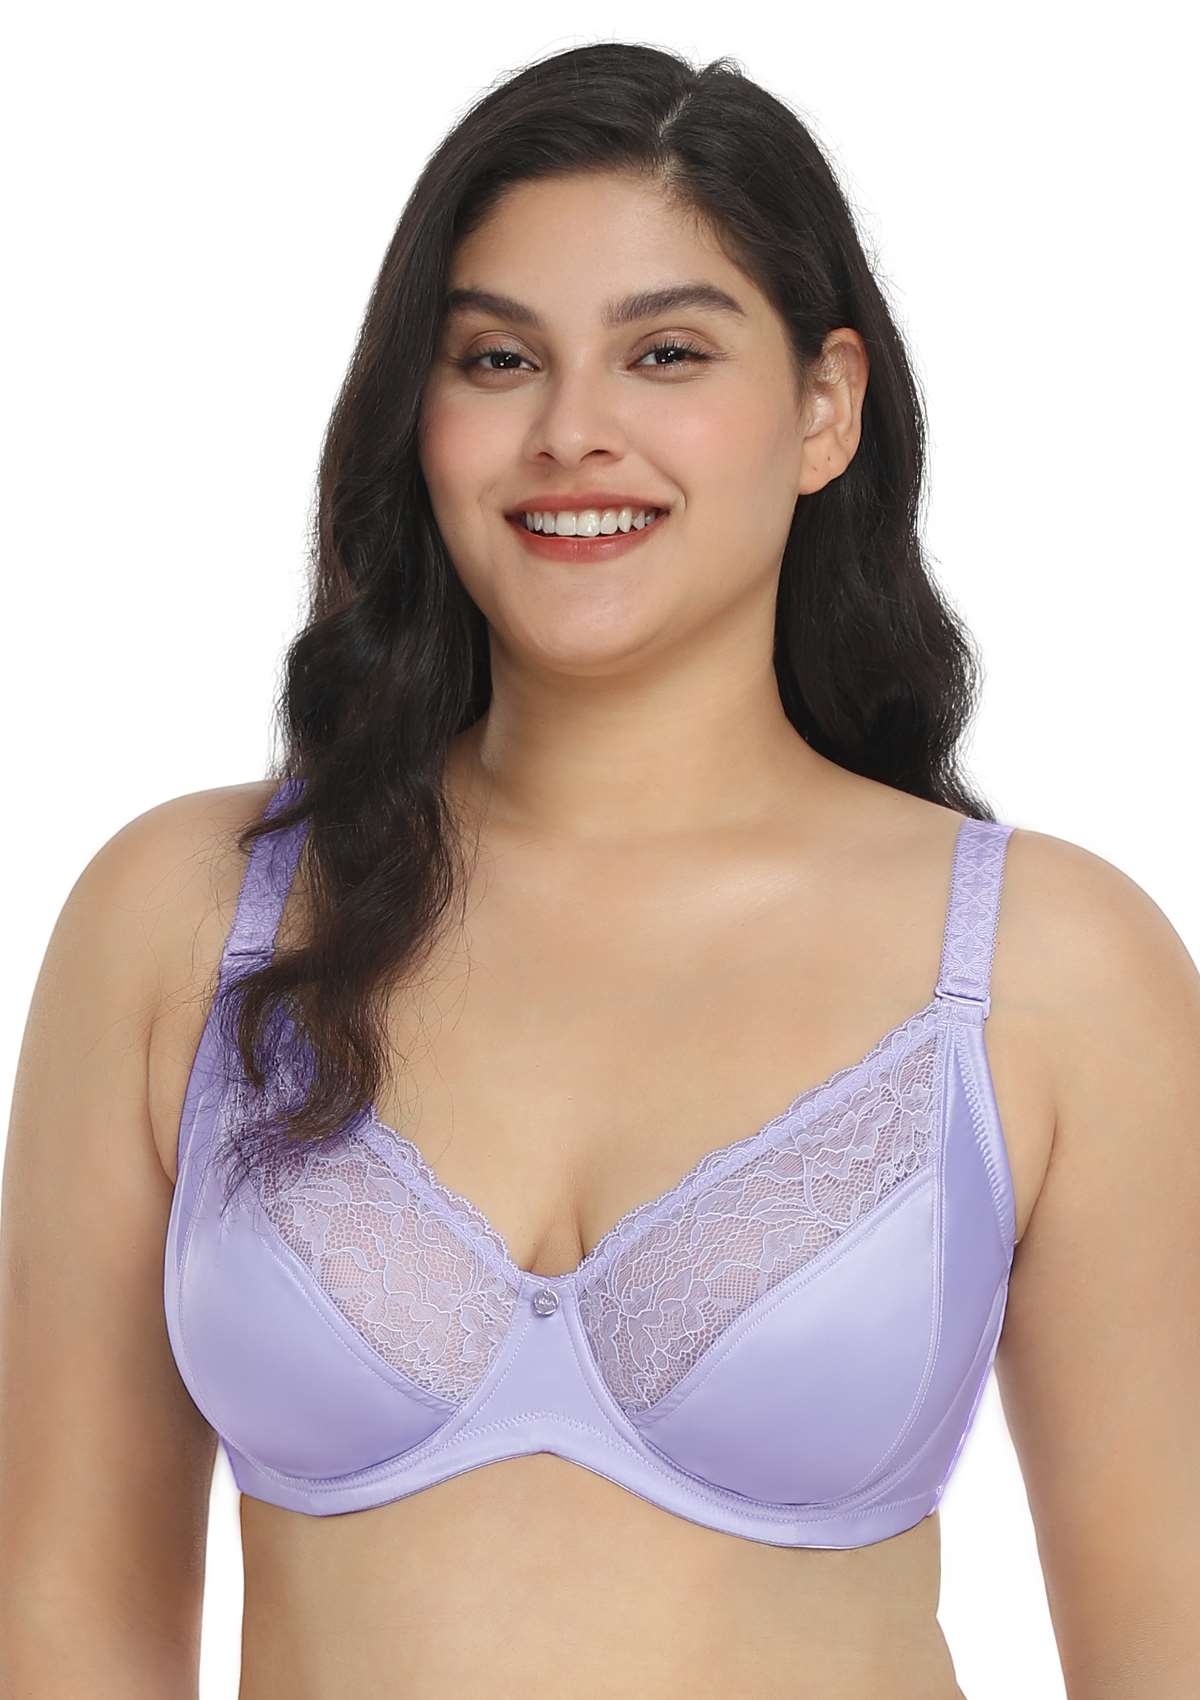 HSIA Foxy Satin Silky Full Coverage Underwire Bra With Floral Lace Trim - Champagne / 40 / D